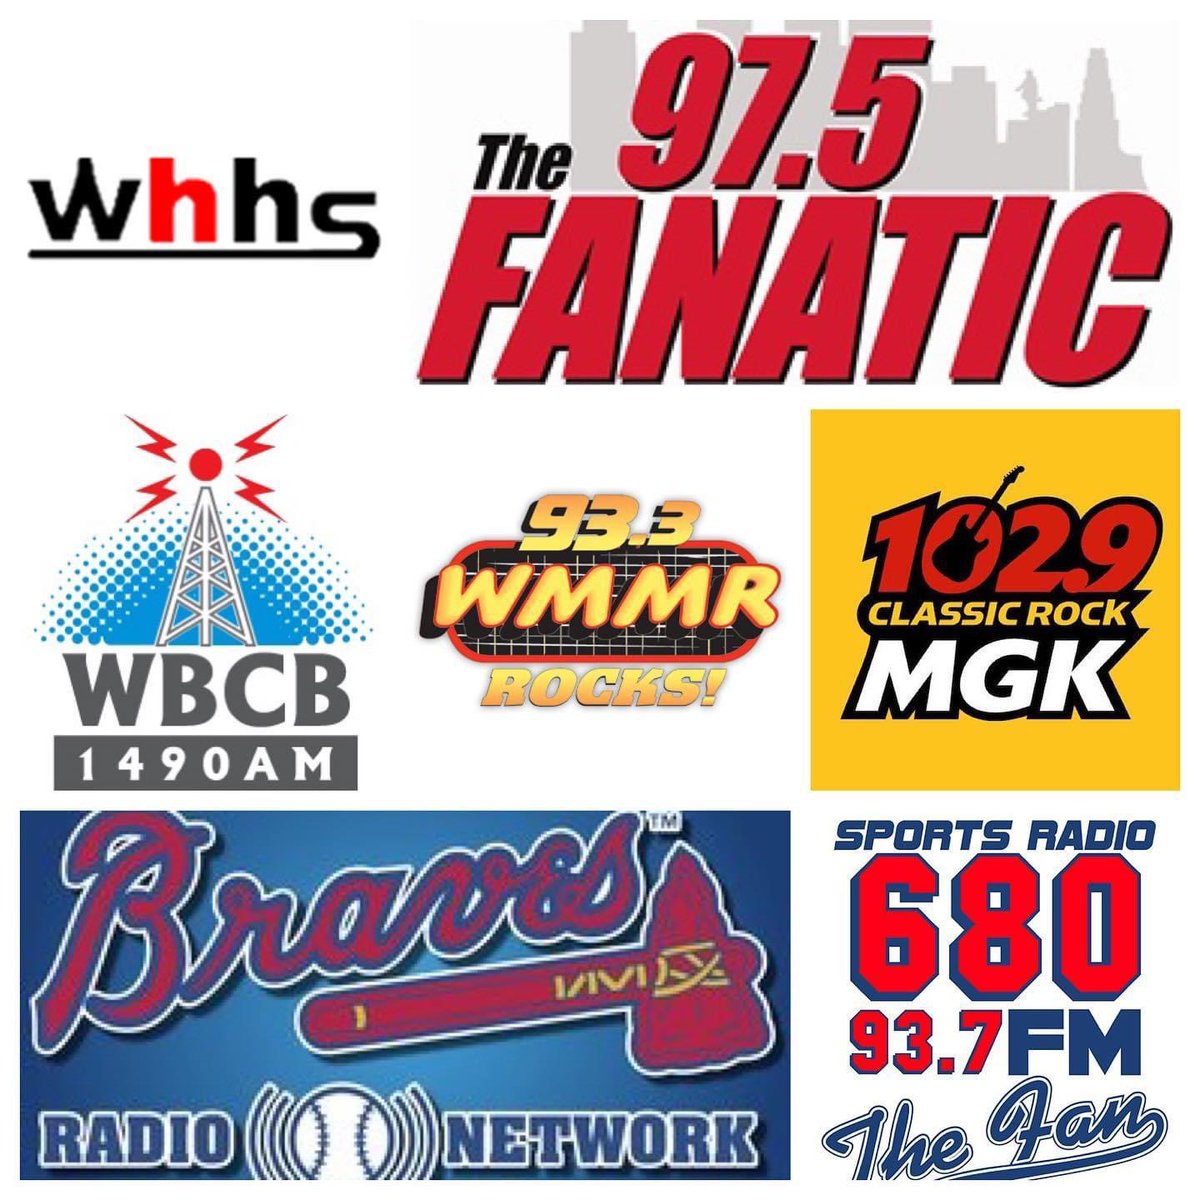 Yesterday was “National Radio Day” and I can’t tell you how fortunate I am to have worked with so many awesome folks over the years. Appreciate all the great listeners along the way as well! Thank you! @WHHSFM @WBCB1490 @933WMMR @975TheFanatic @WMGK @680TheFan @BravesRadioNet